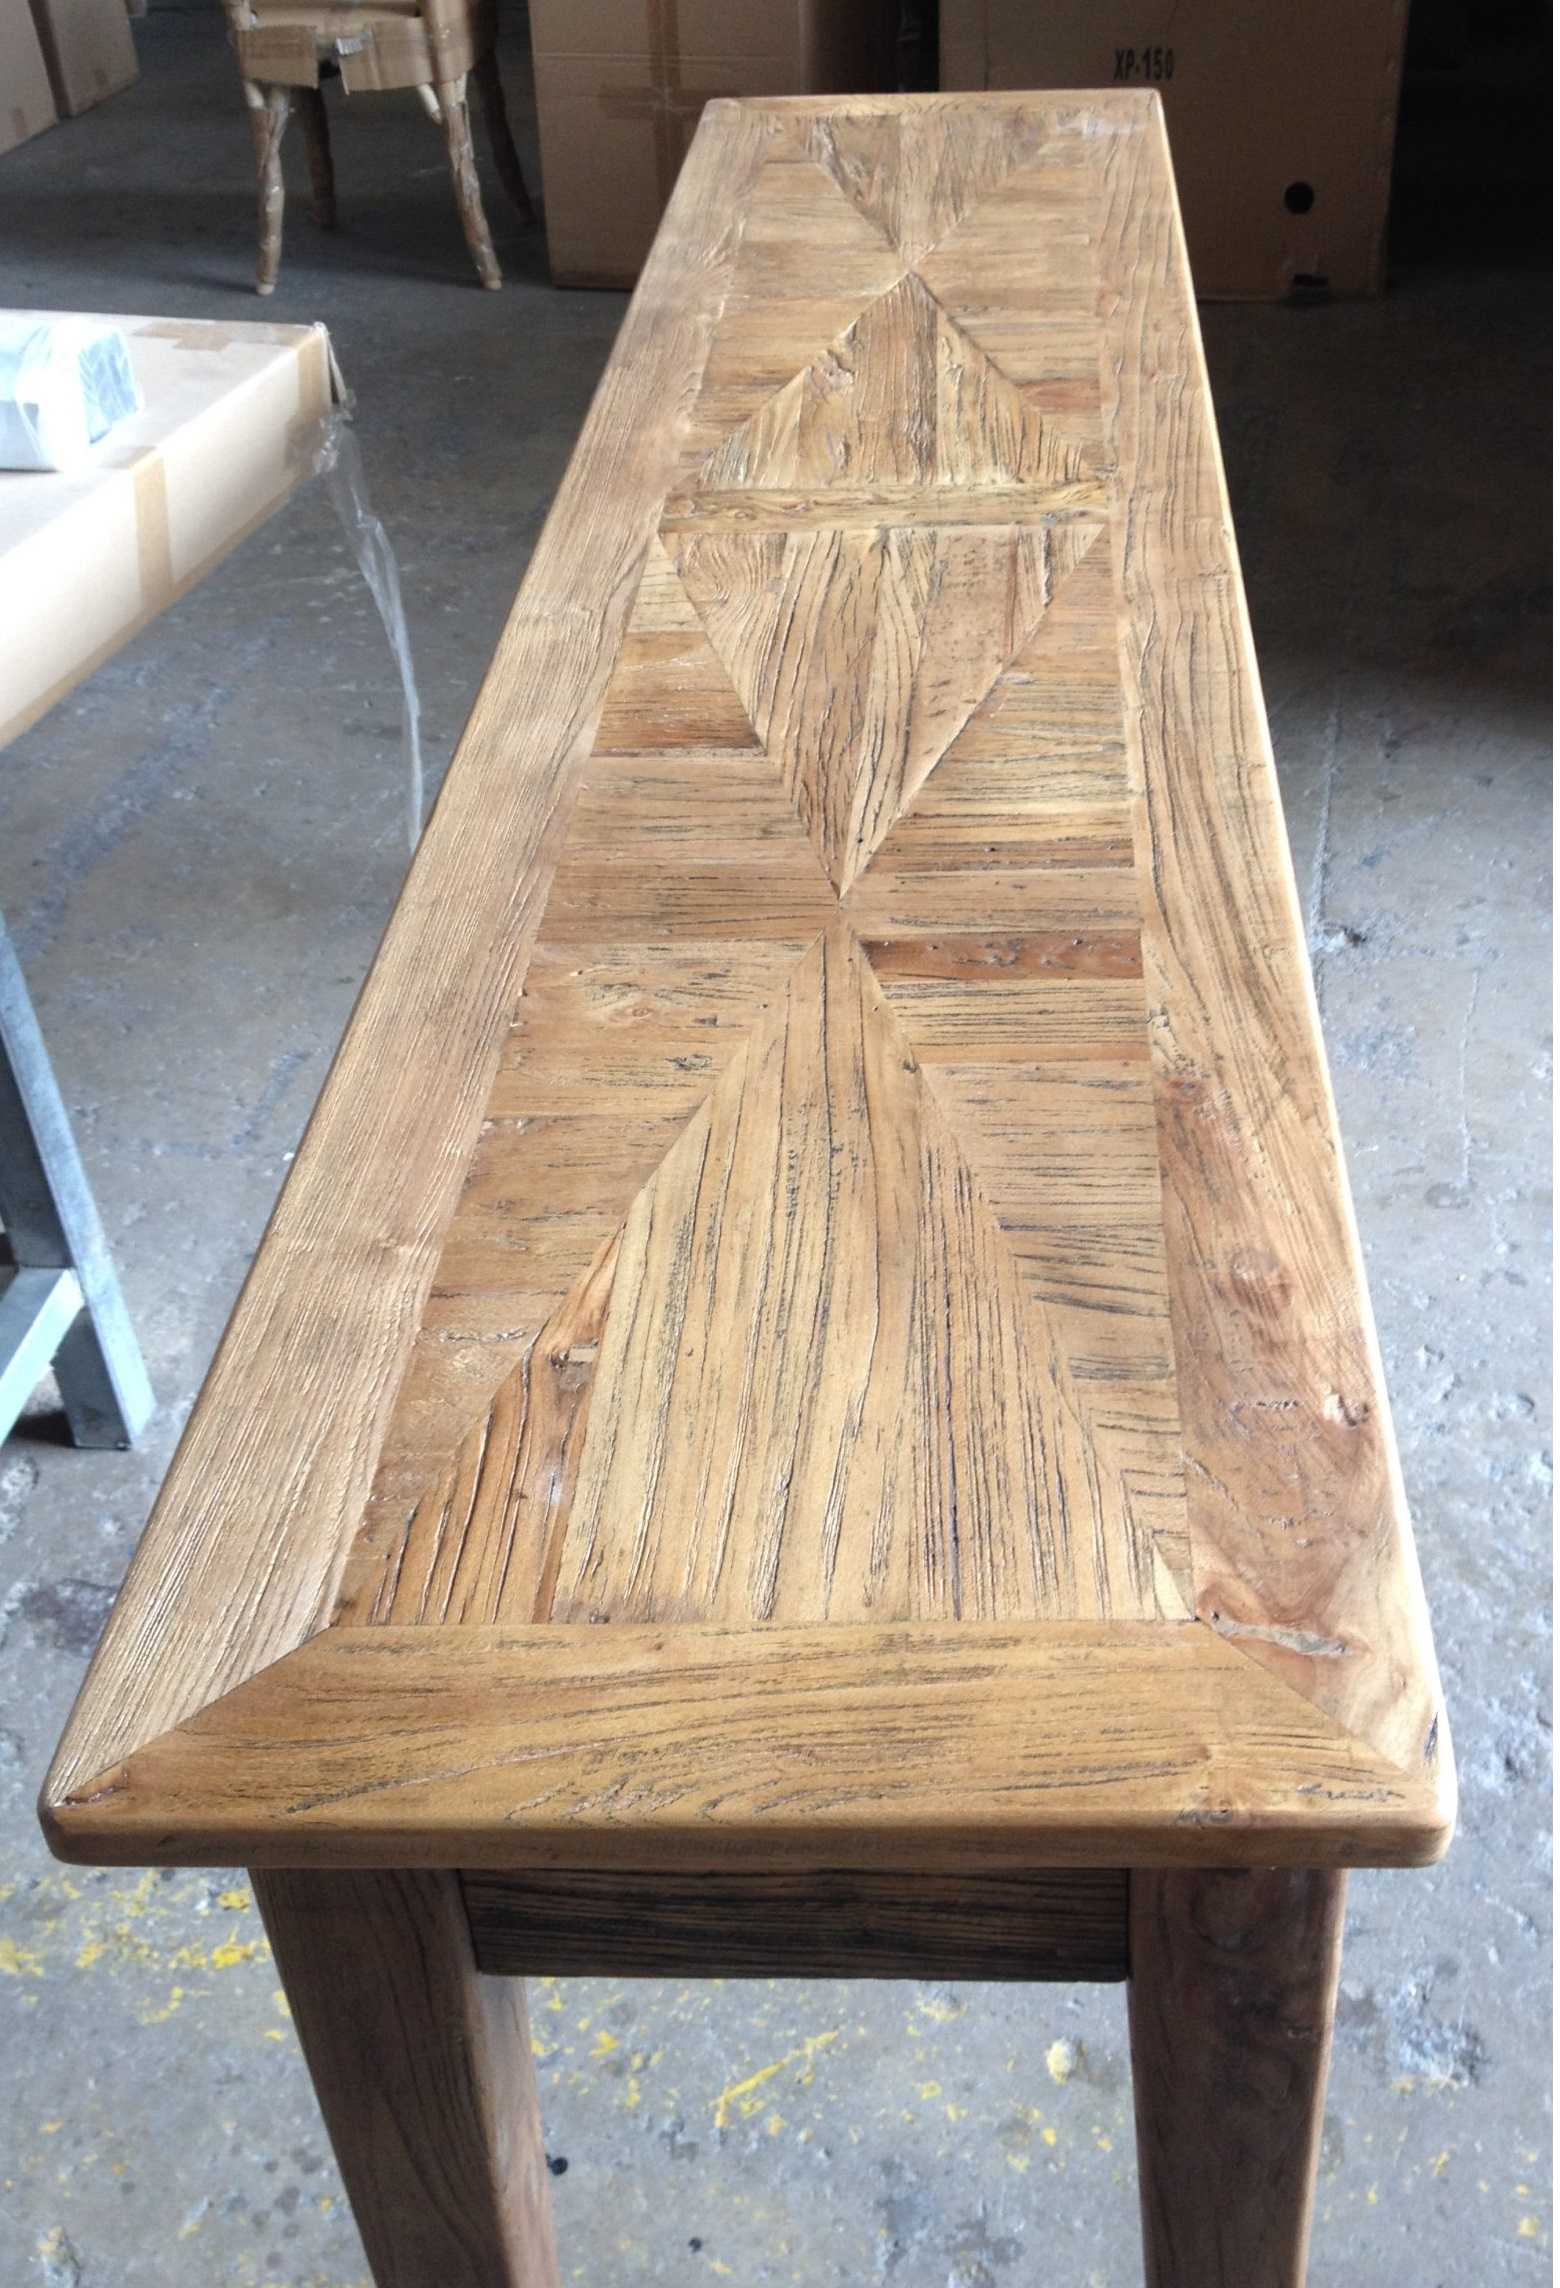 MF Parquetry Recycled Elm Timber Dining Bench